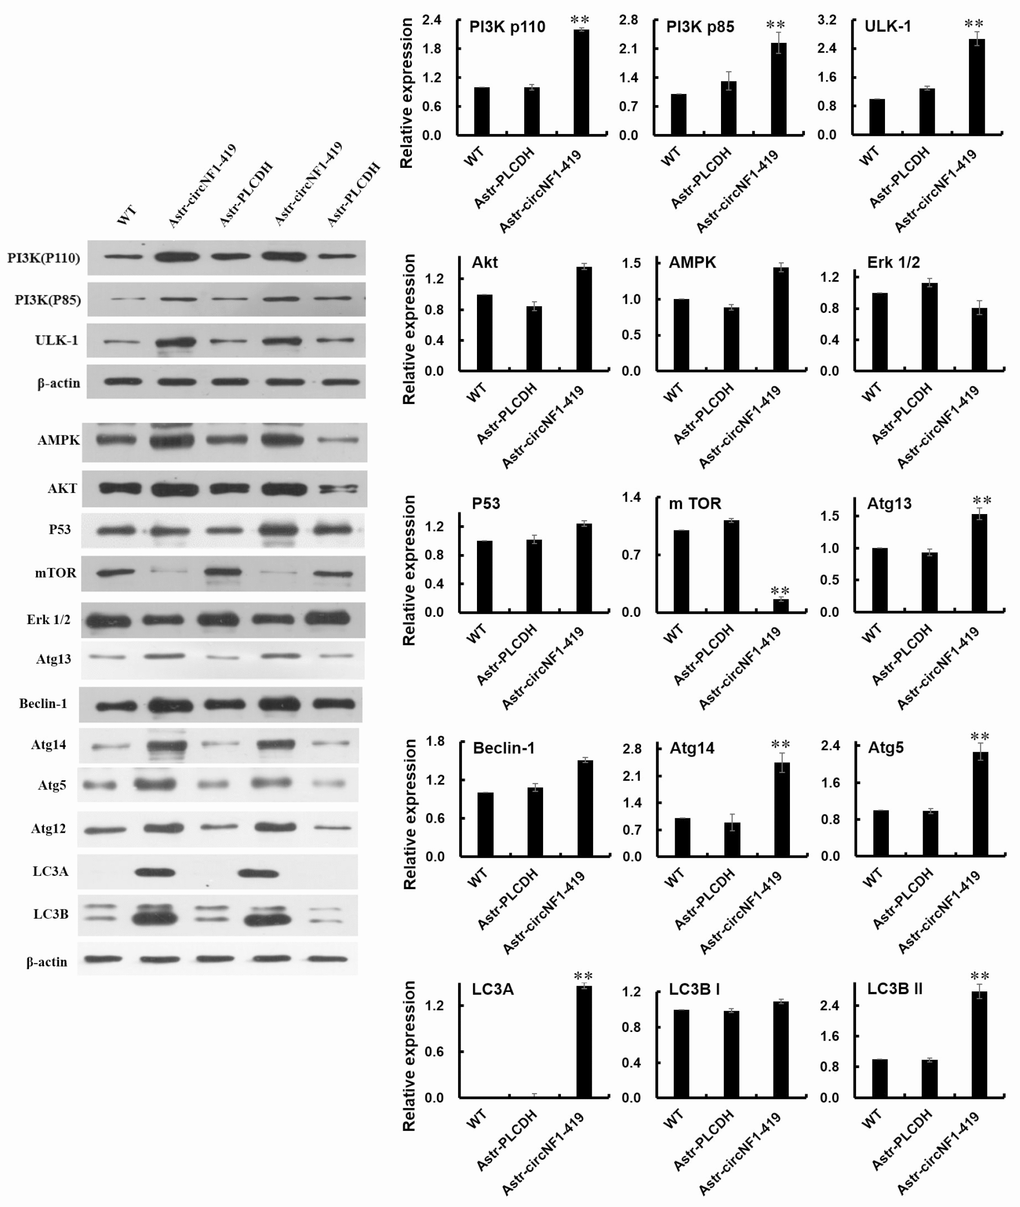 CircNF1-419 participates in the regulation of autophagy in astrocyte. The expression of PI3Kp85, PI3Kp100, AMPK, Atg13, ULK1, Beclin-1, Atg14, Atg5, Atg12, LC3A, LC3B I and LC3B II proteins in the over-expressing circNF1-419-transfected rat astrocyte were measured by using western blotting. Data are presented as the means±SD of 3 independent experiments. **p vs. the WT by one-way ANOVA, followed by the Holm-Sidak test.